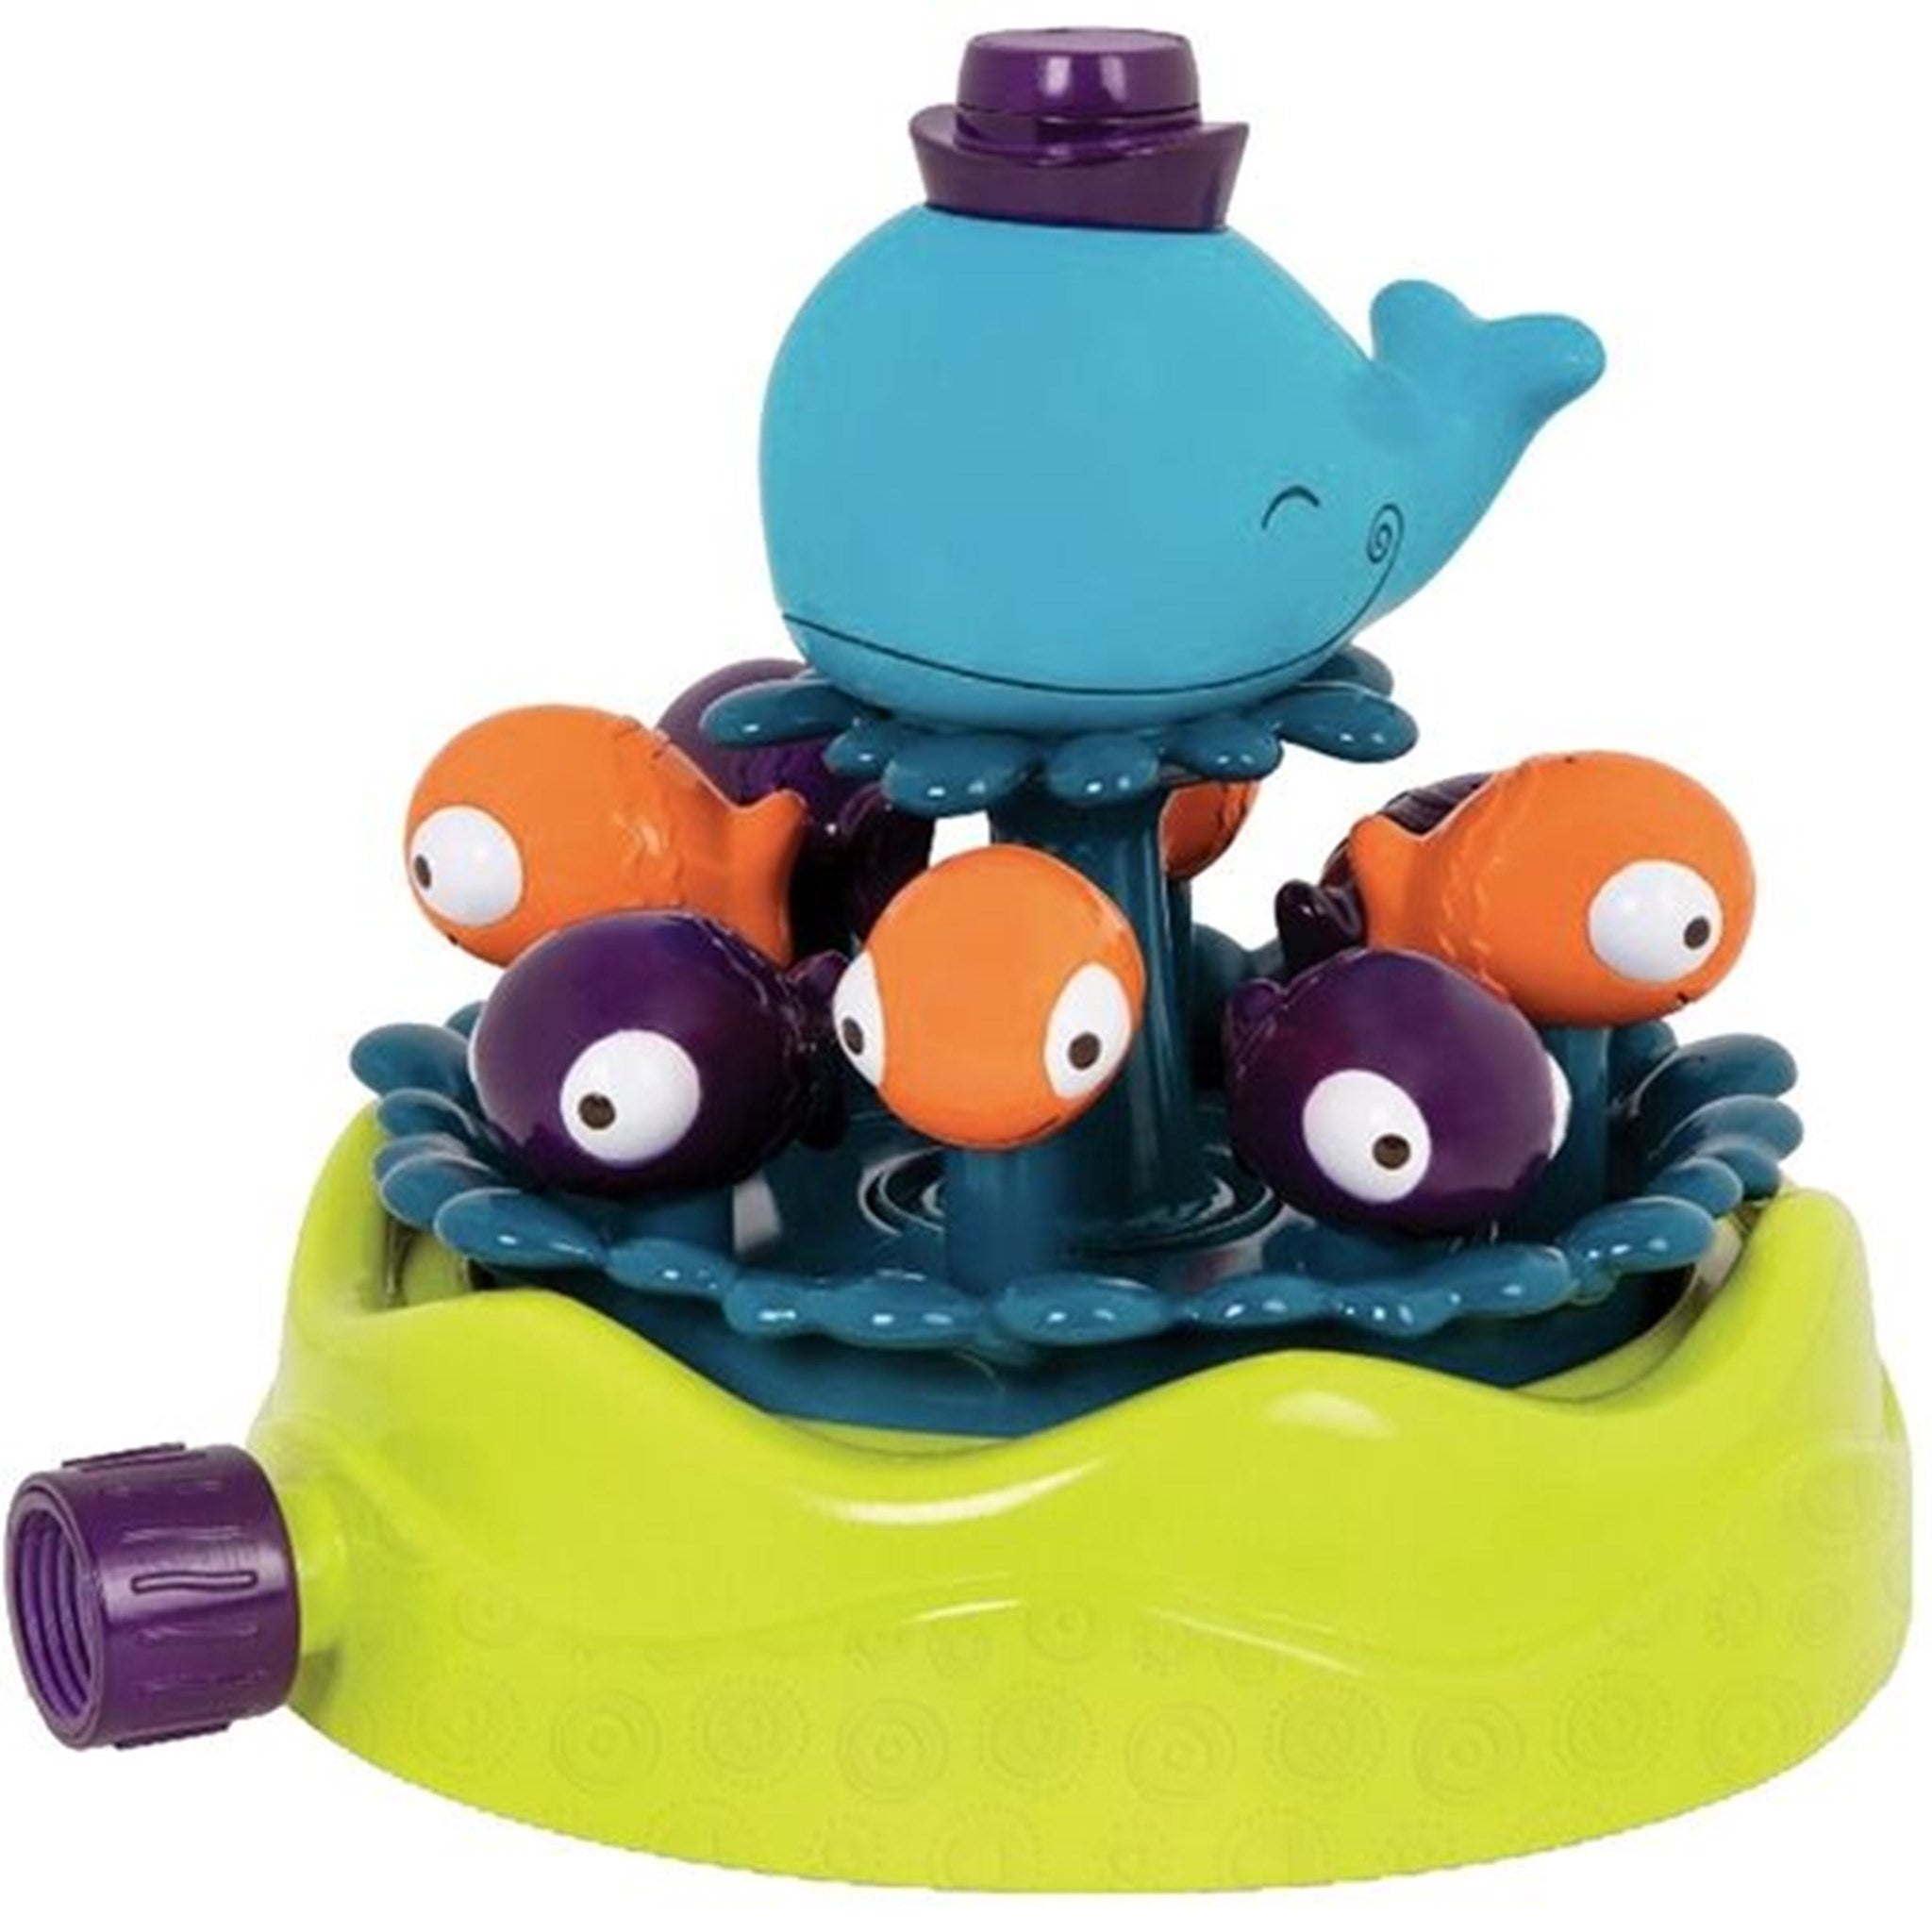 B-toys Whirly Whale - Sprinkler